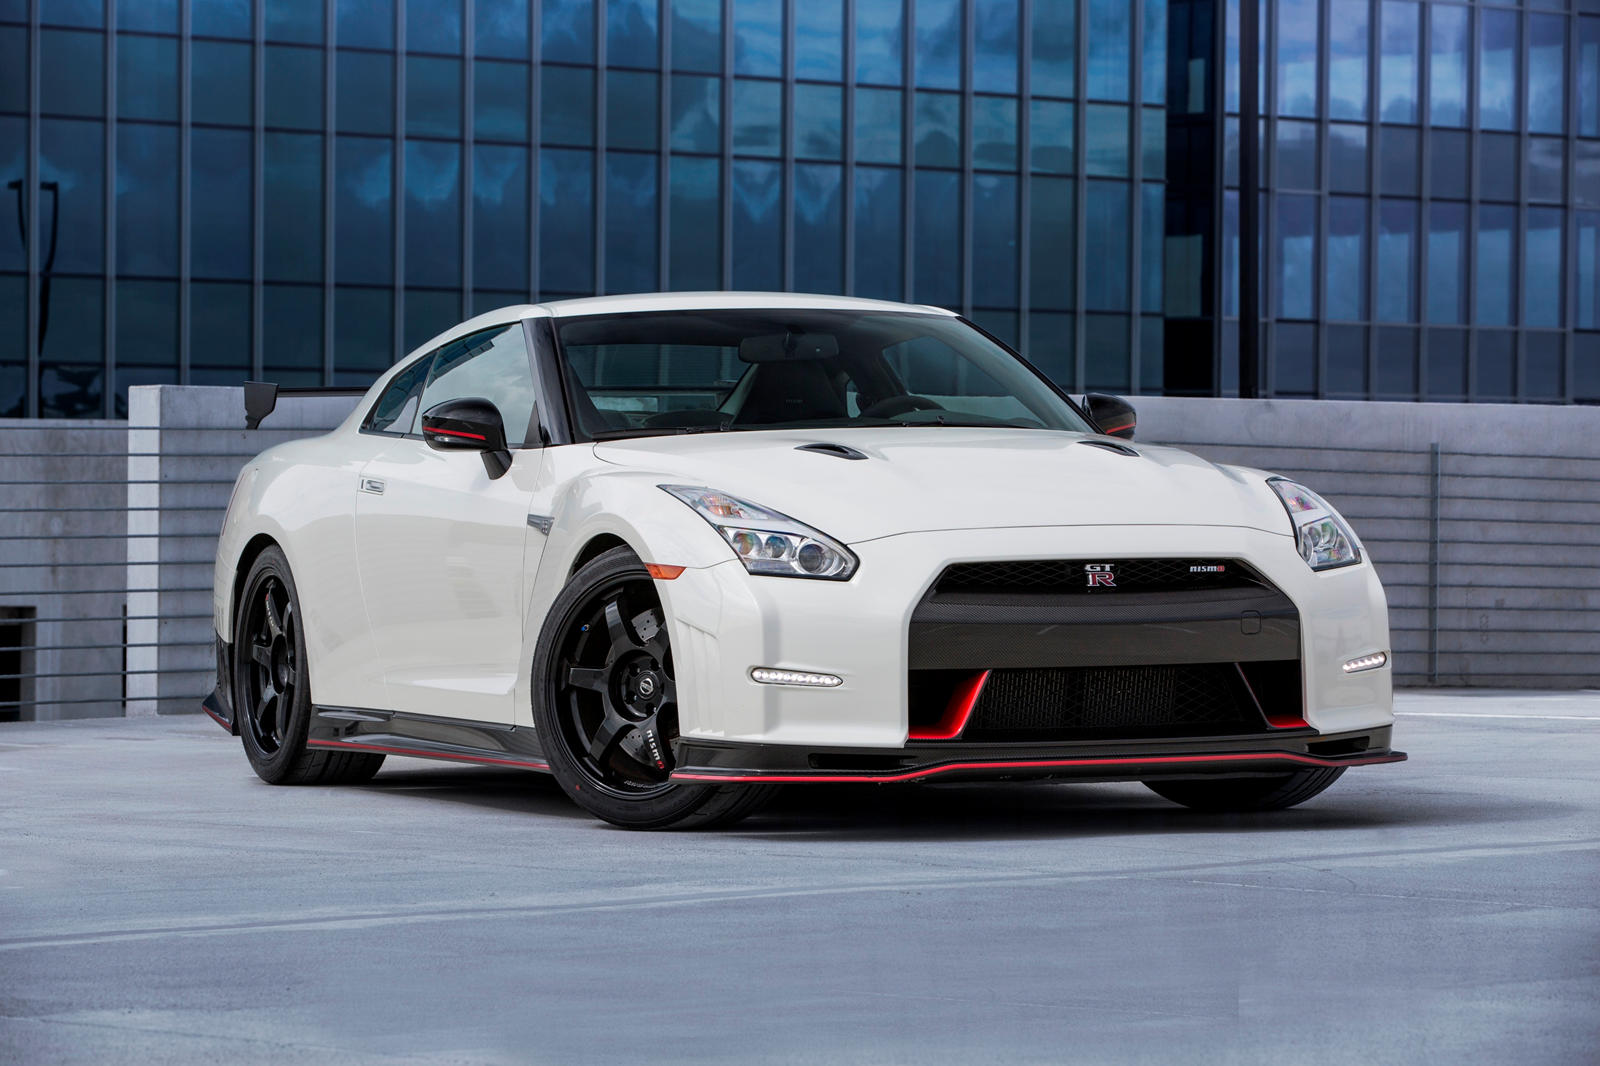 Used R35 Nissan GTR NISMO For Sale CarBuzz